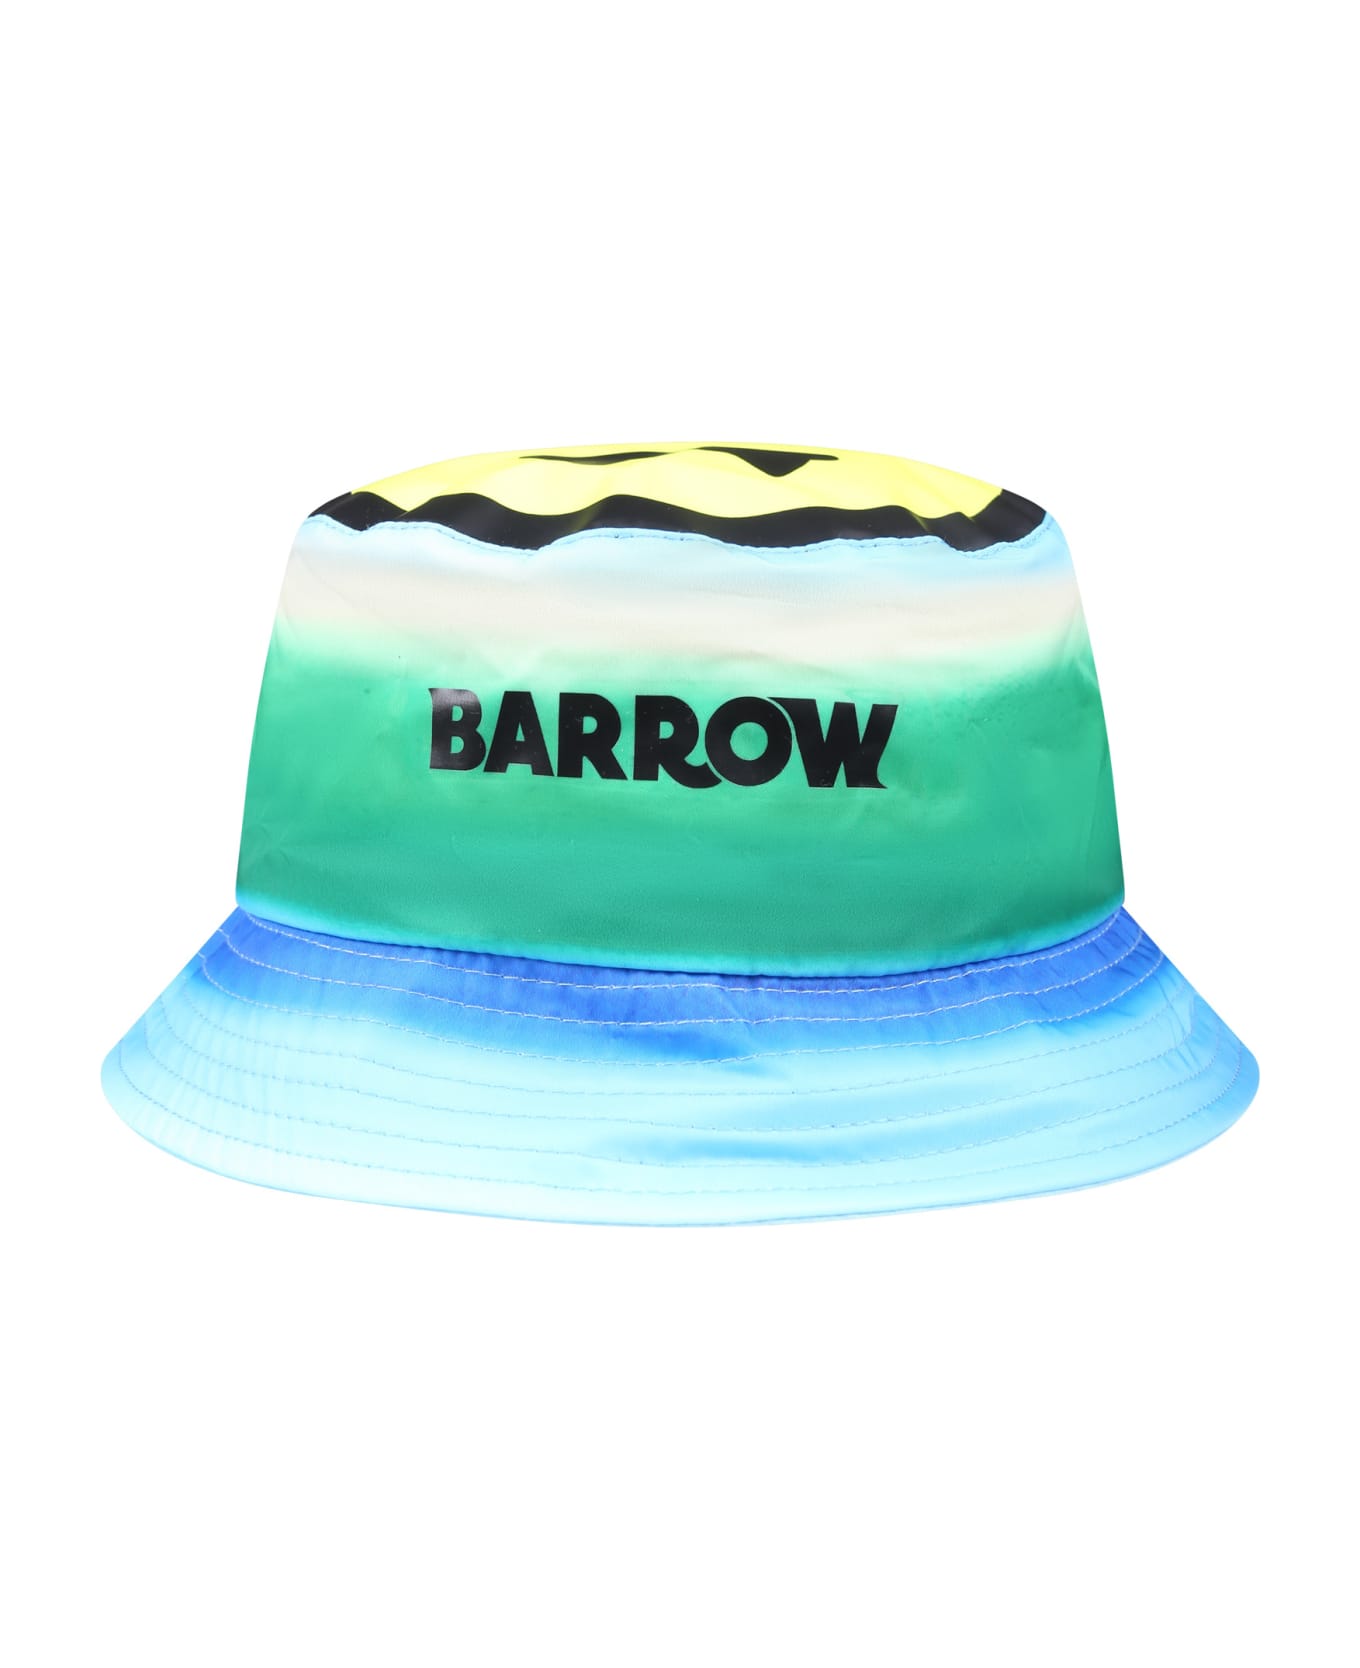 Barrow Light Blue Cloche For Kids With Smiley - Light Blue